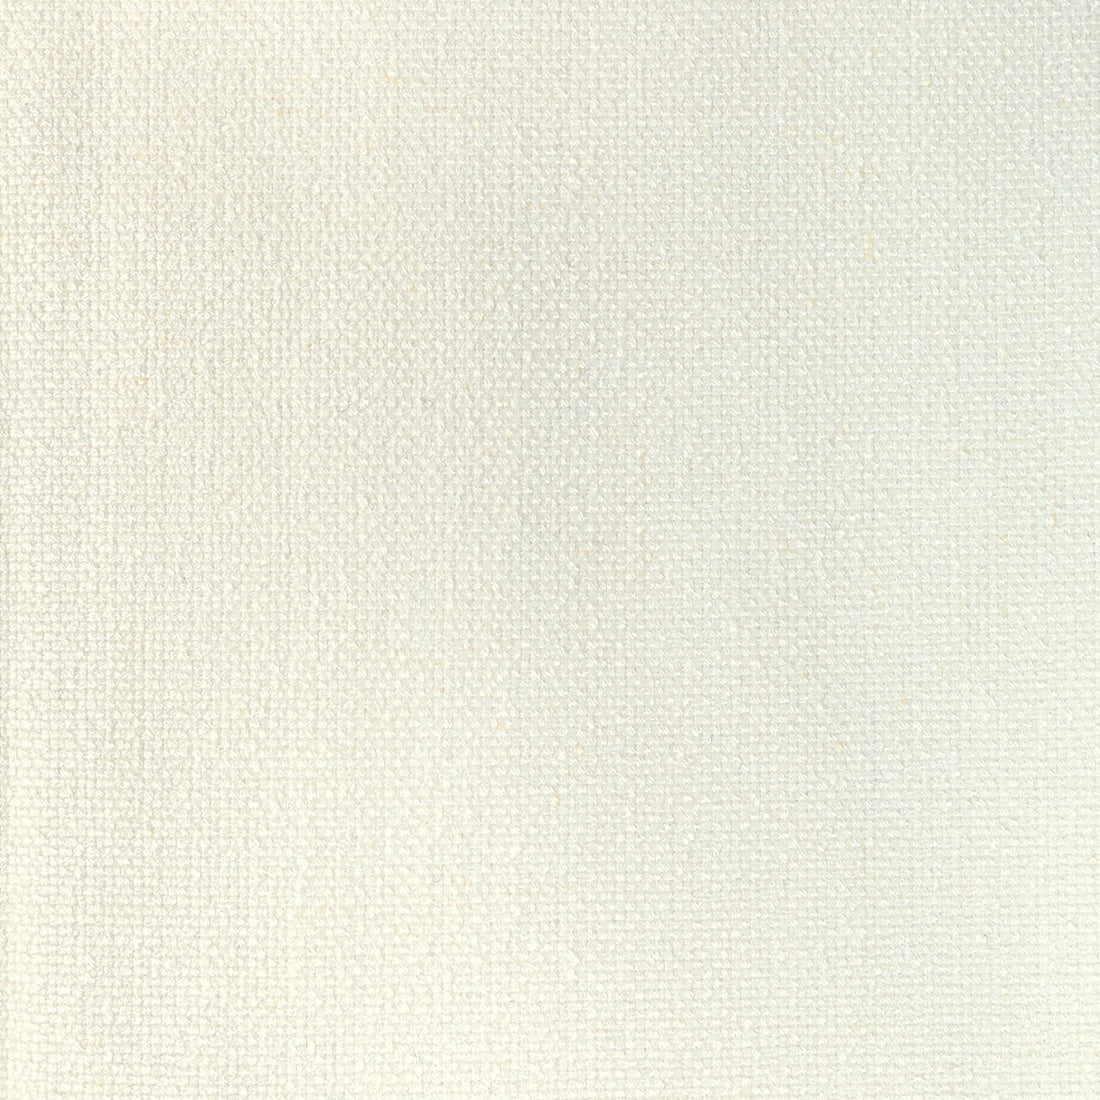 Rospico Plain fabric in ivory color - pattern 8022110.1.0 - by Brunschwig &amp; Fils in the Lorient Weaves collection